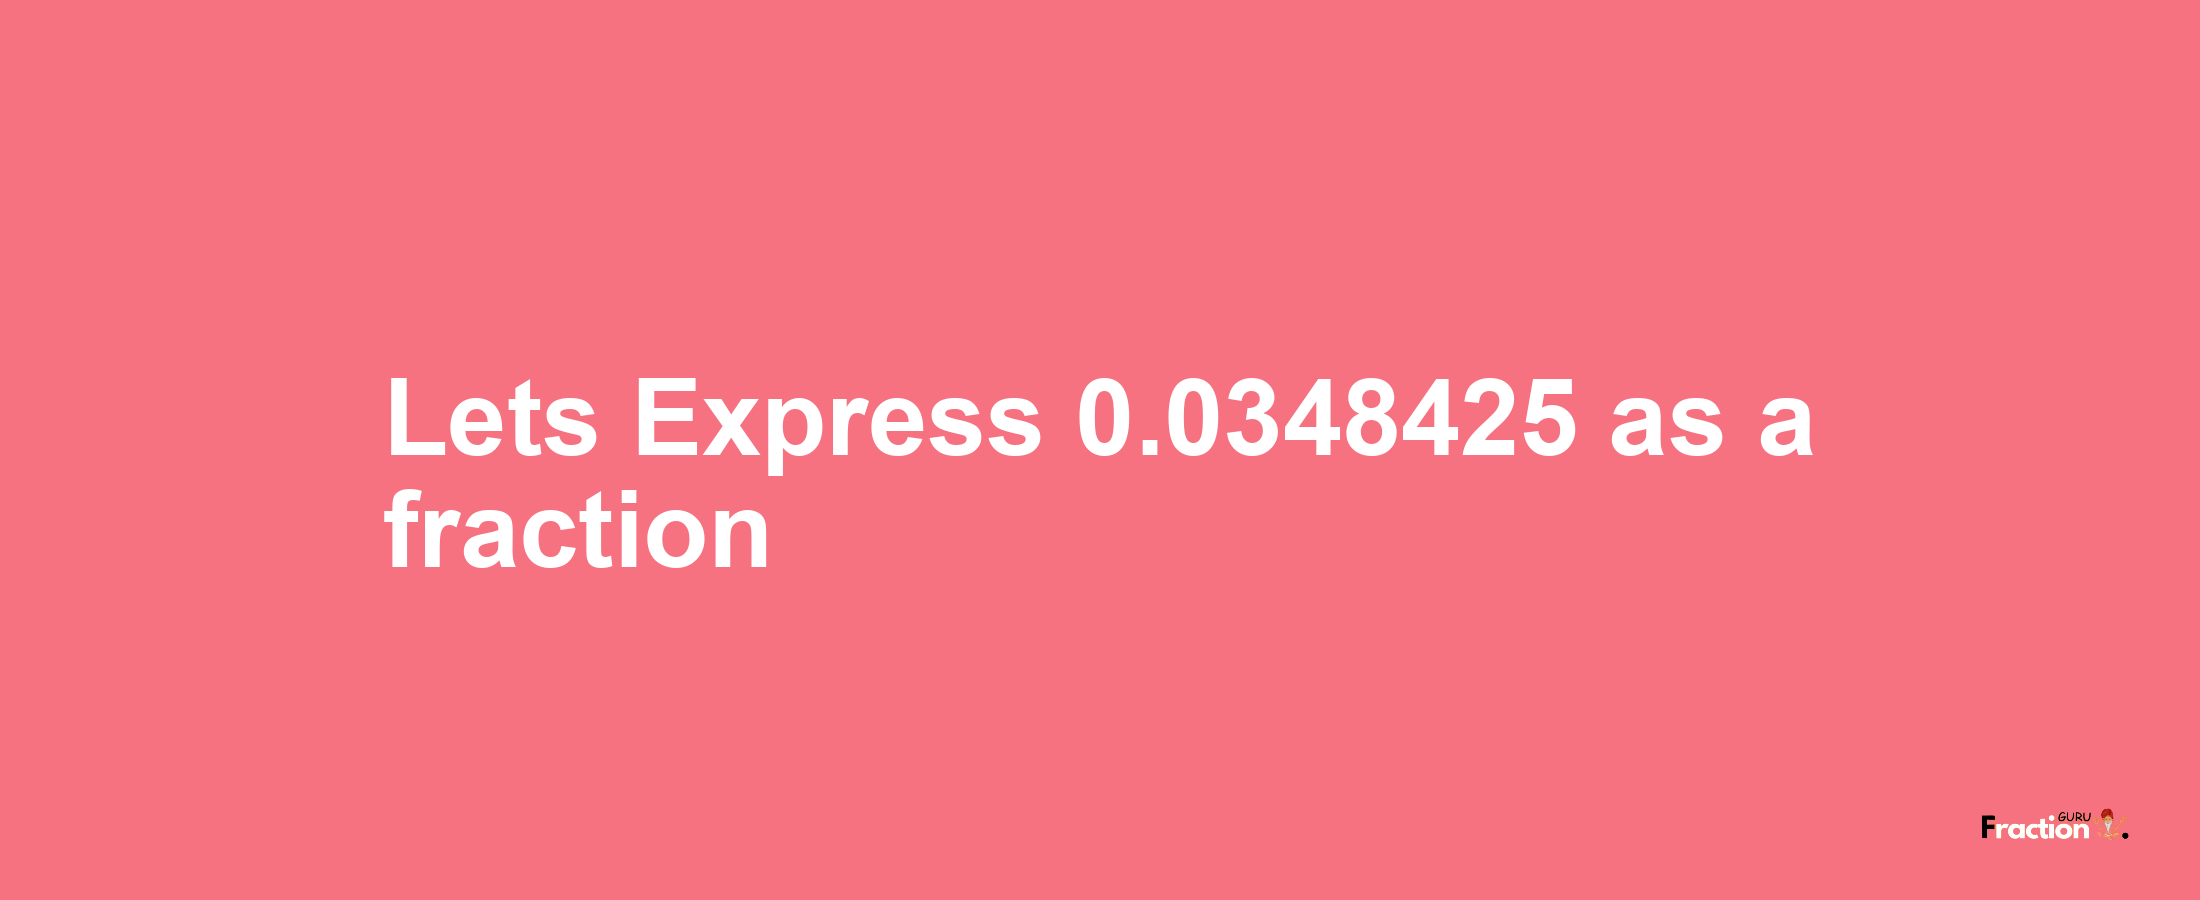 Lets Express 0.0348425 as afraction